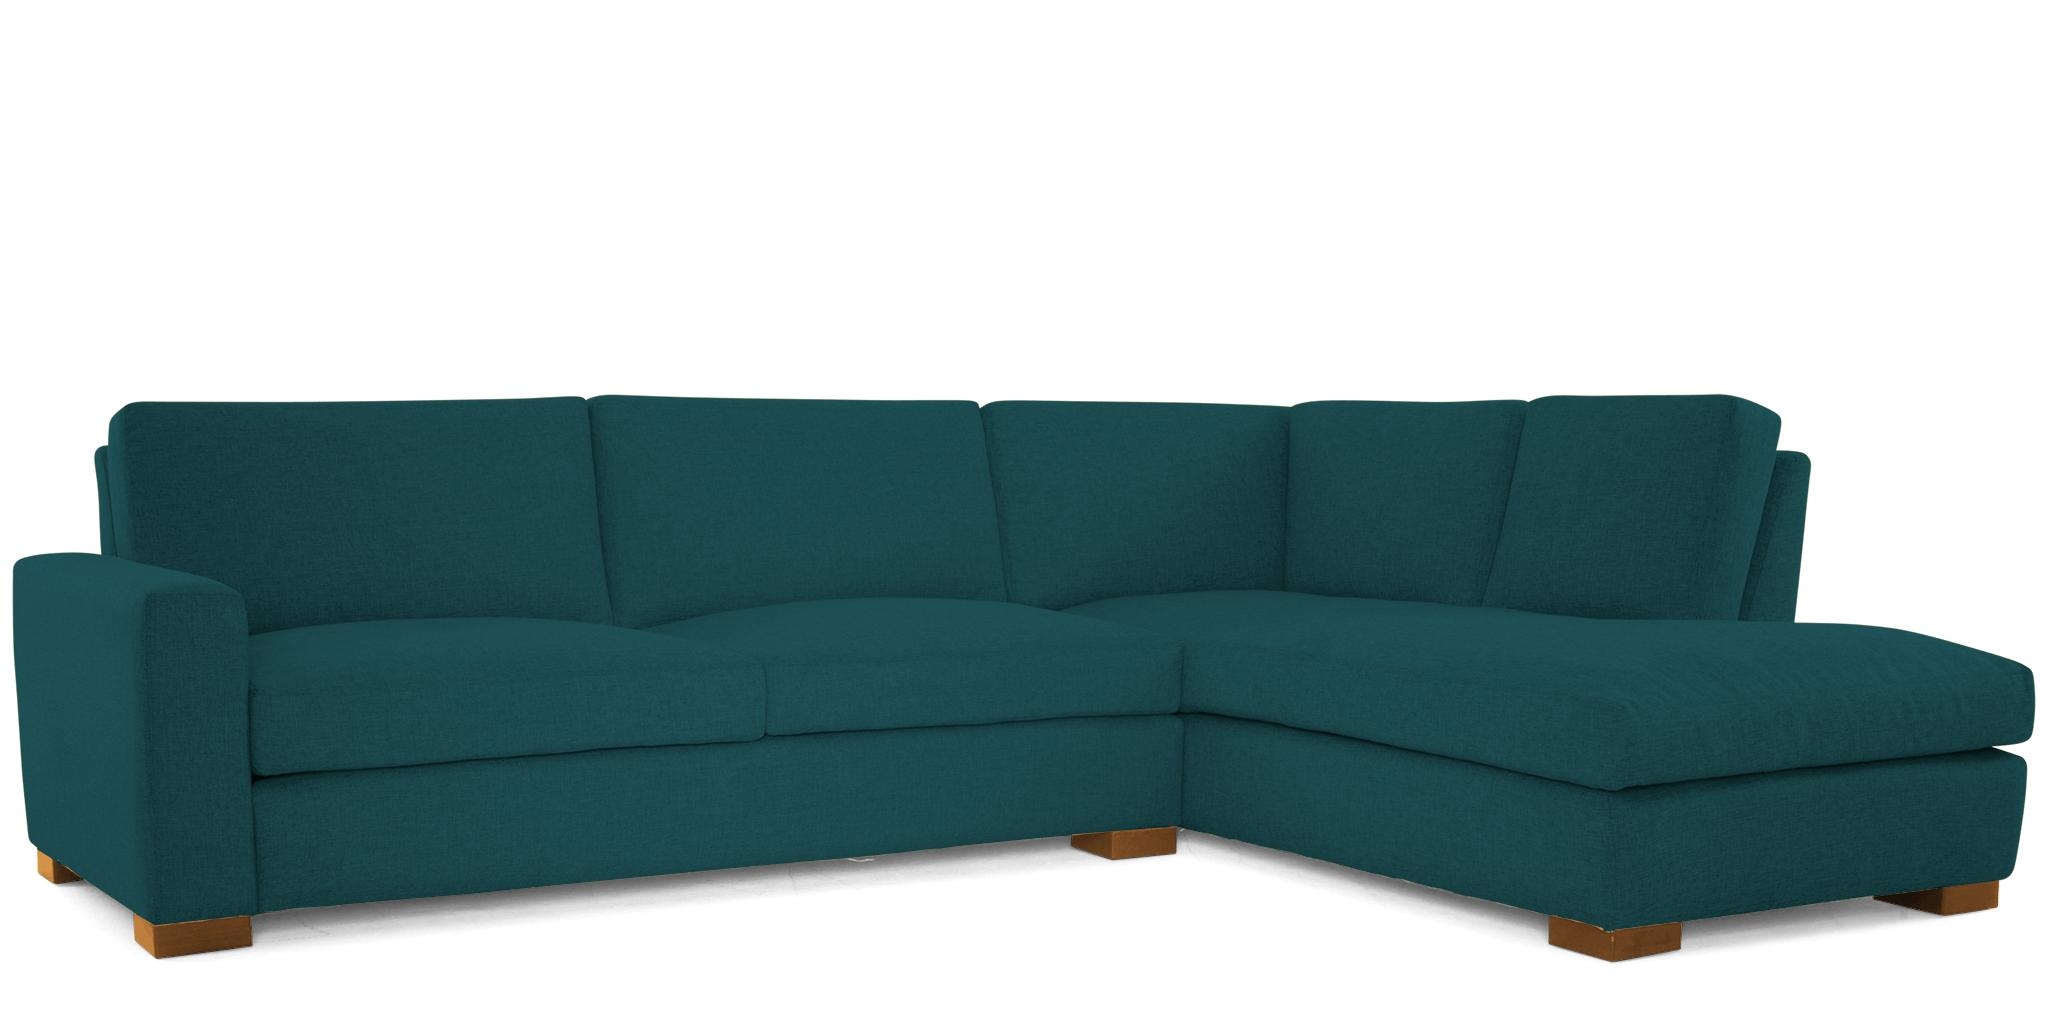 Blue Anton Mid Century Modern Sectional with Bumper - Royale Peacock - Mocha - Right  - Image 1